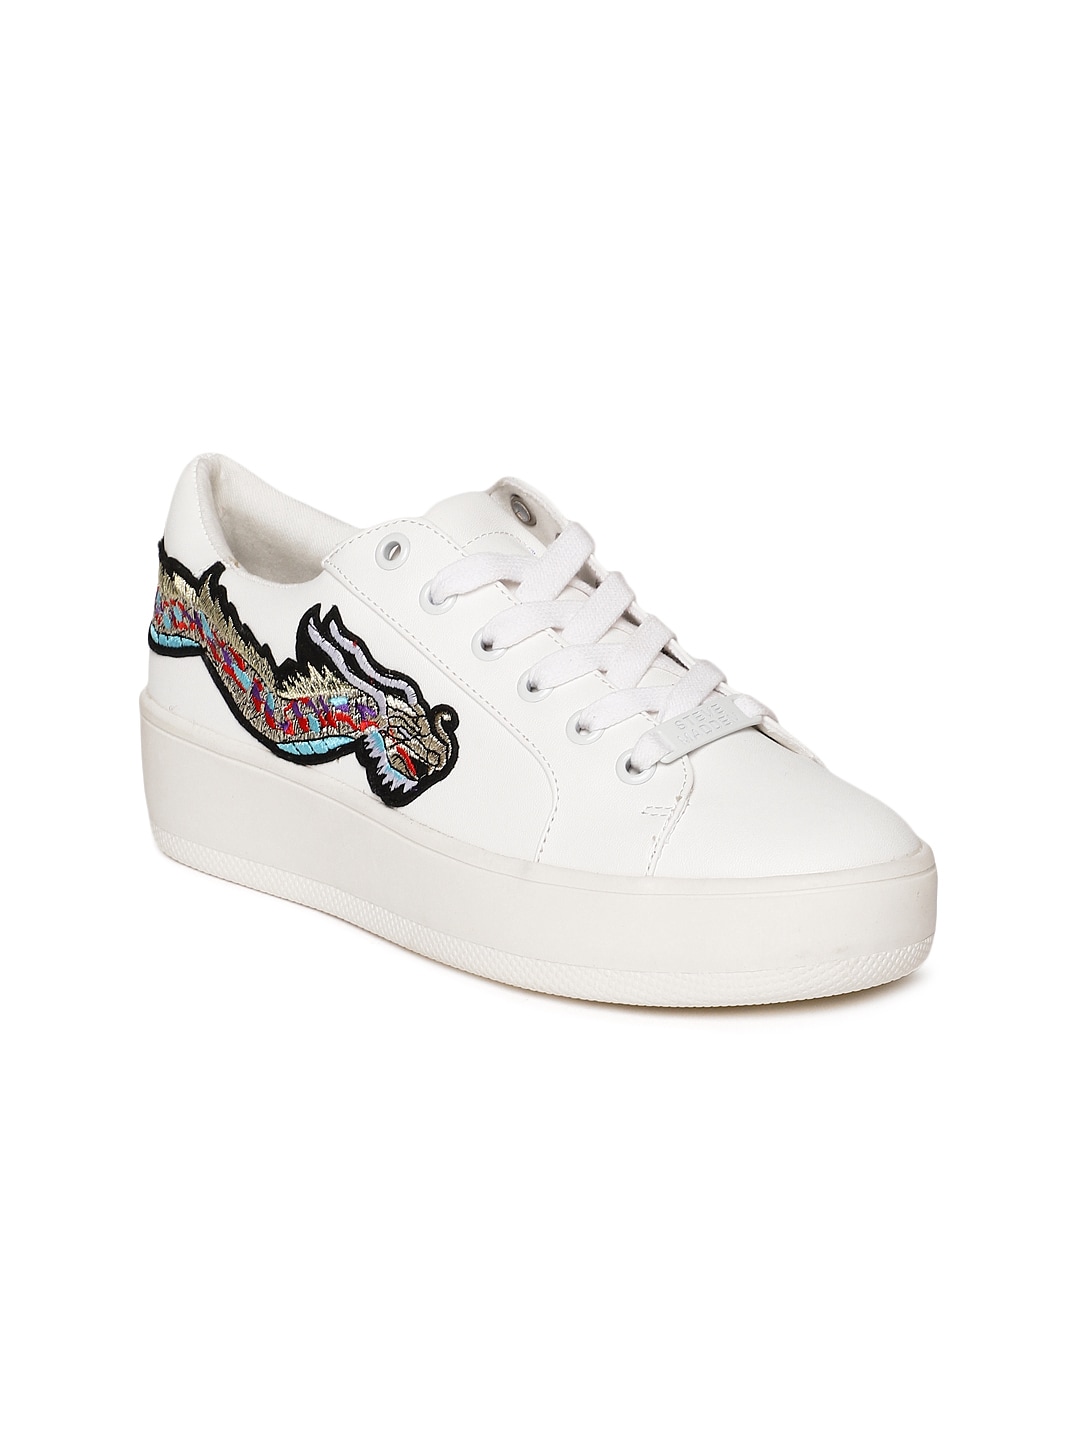 Steve Madden Caffine White Casual Sneakers for women - Get stylish shoes for Every Women Online ...